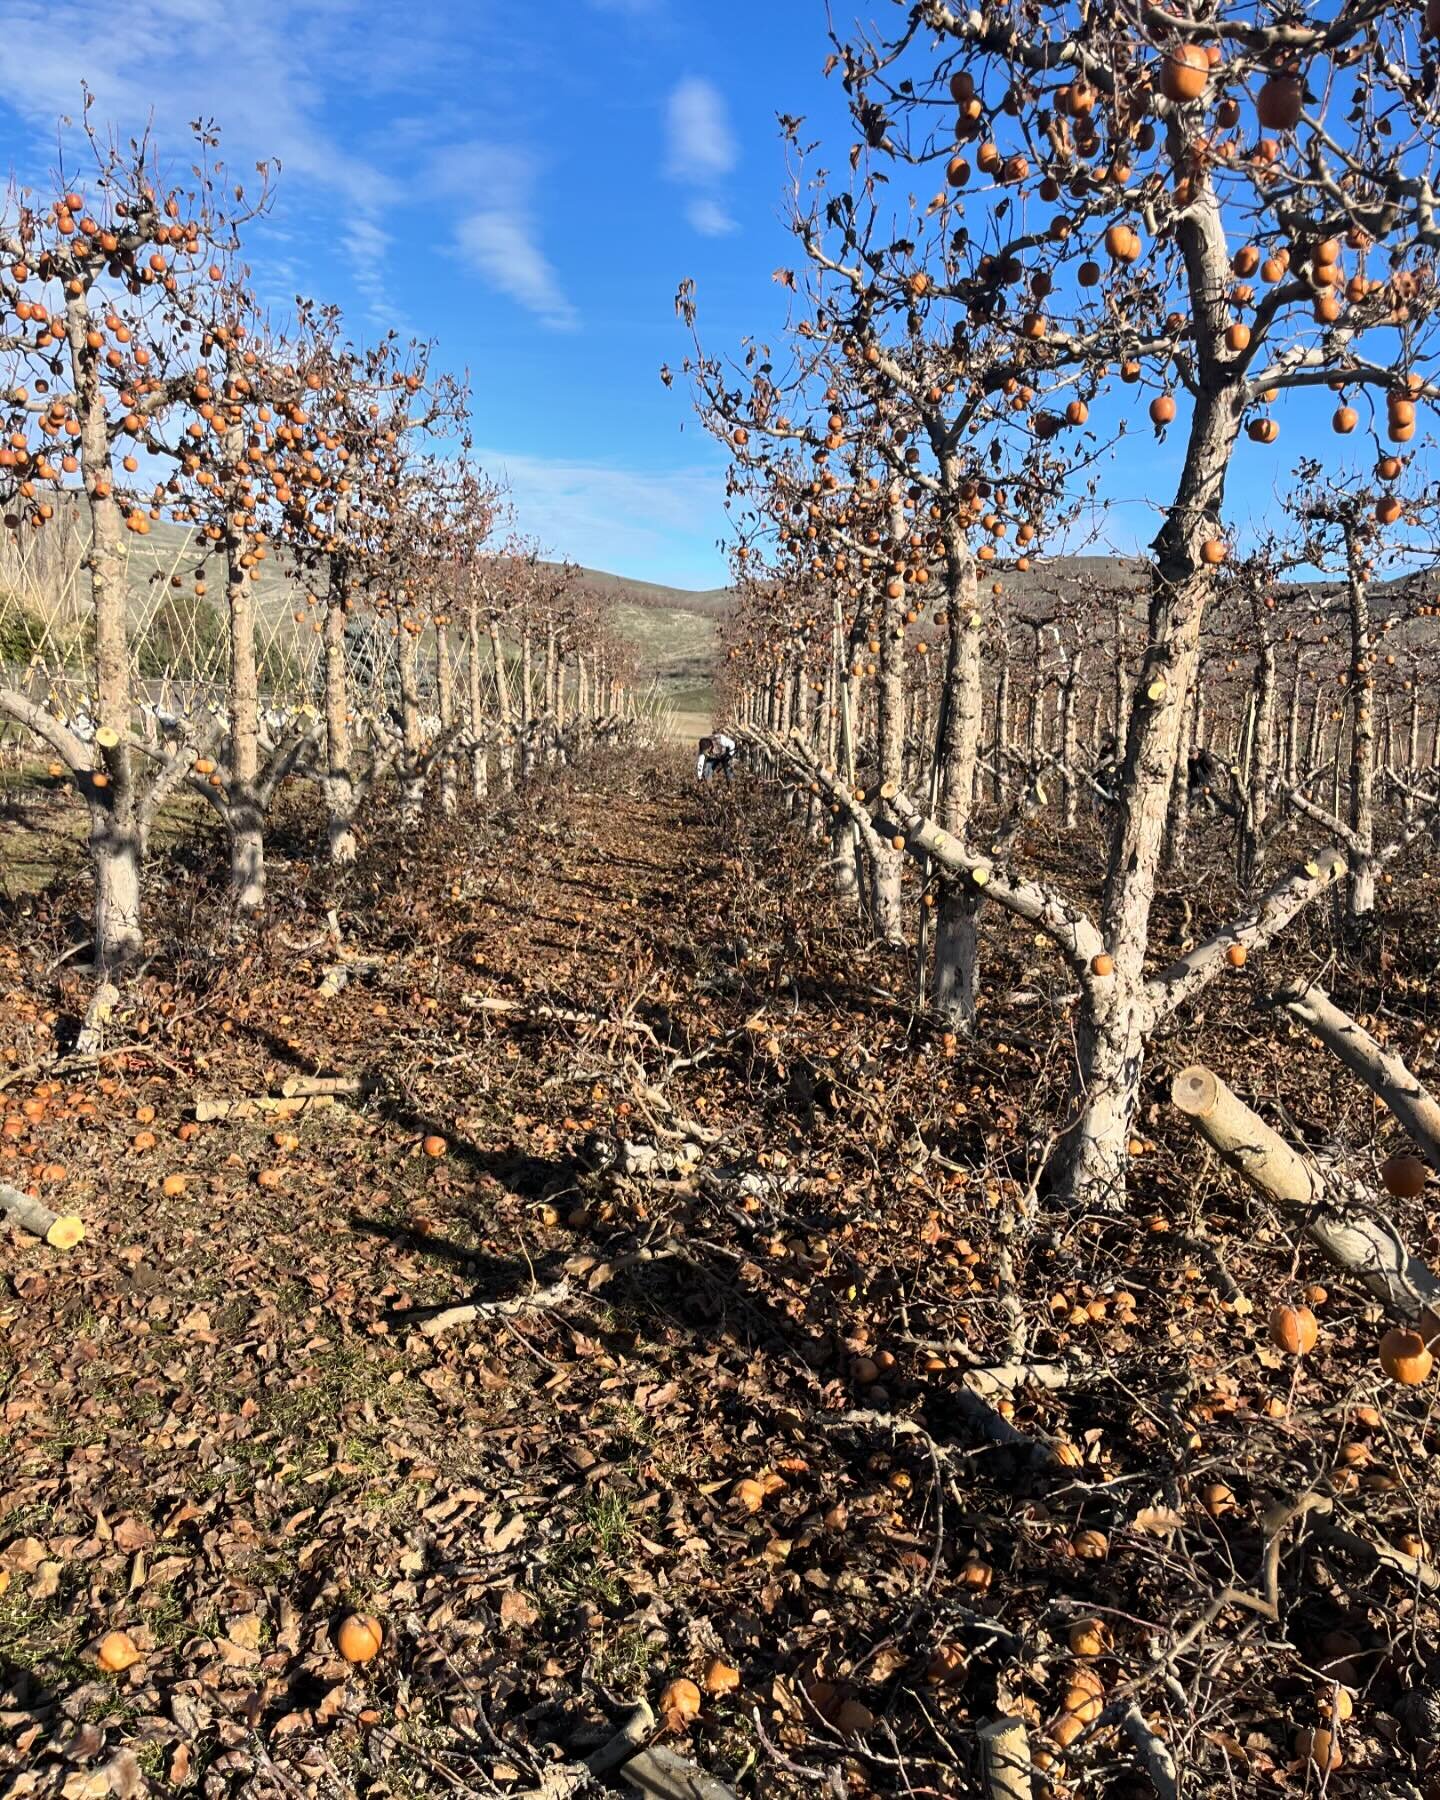 &lsquo;Tis the season for grafting!

We are cutting back these older Pink Lady trees to graft them over to pink fleshed apple varieties like Mountain Rose and Lucy Glo.

By grafting we can keep the mature root stock and have these &ldquo;new&rdquo; t